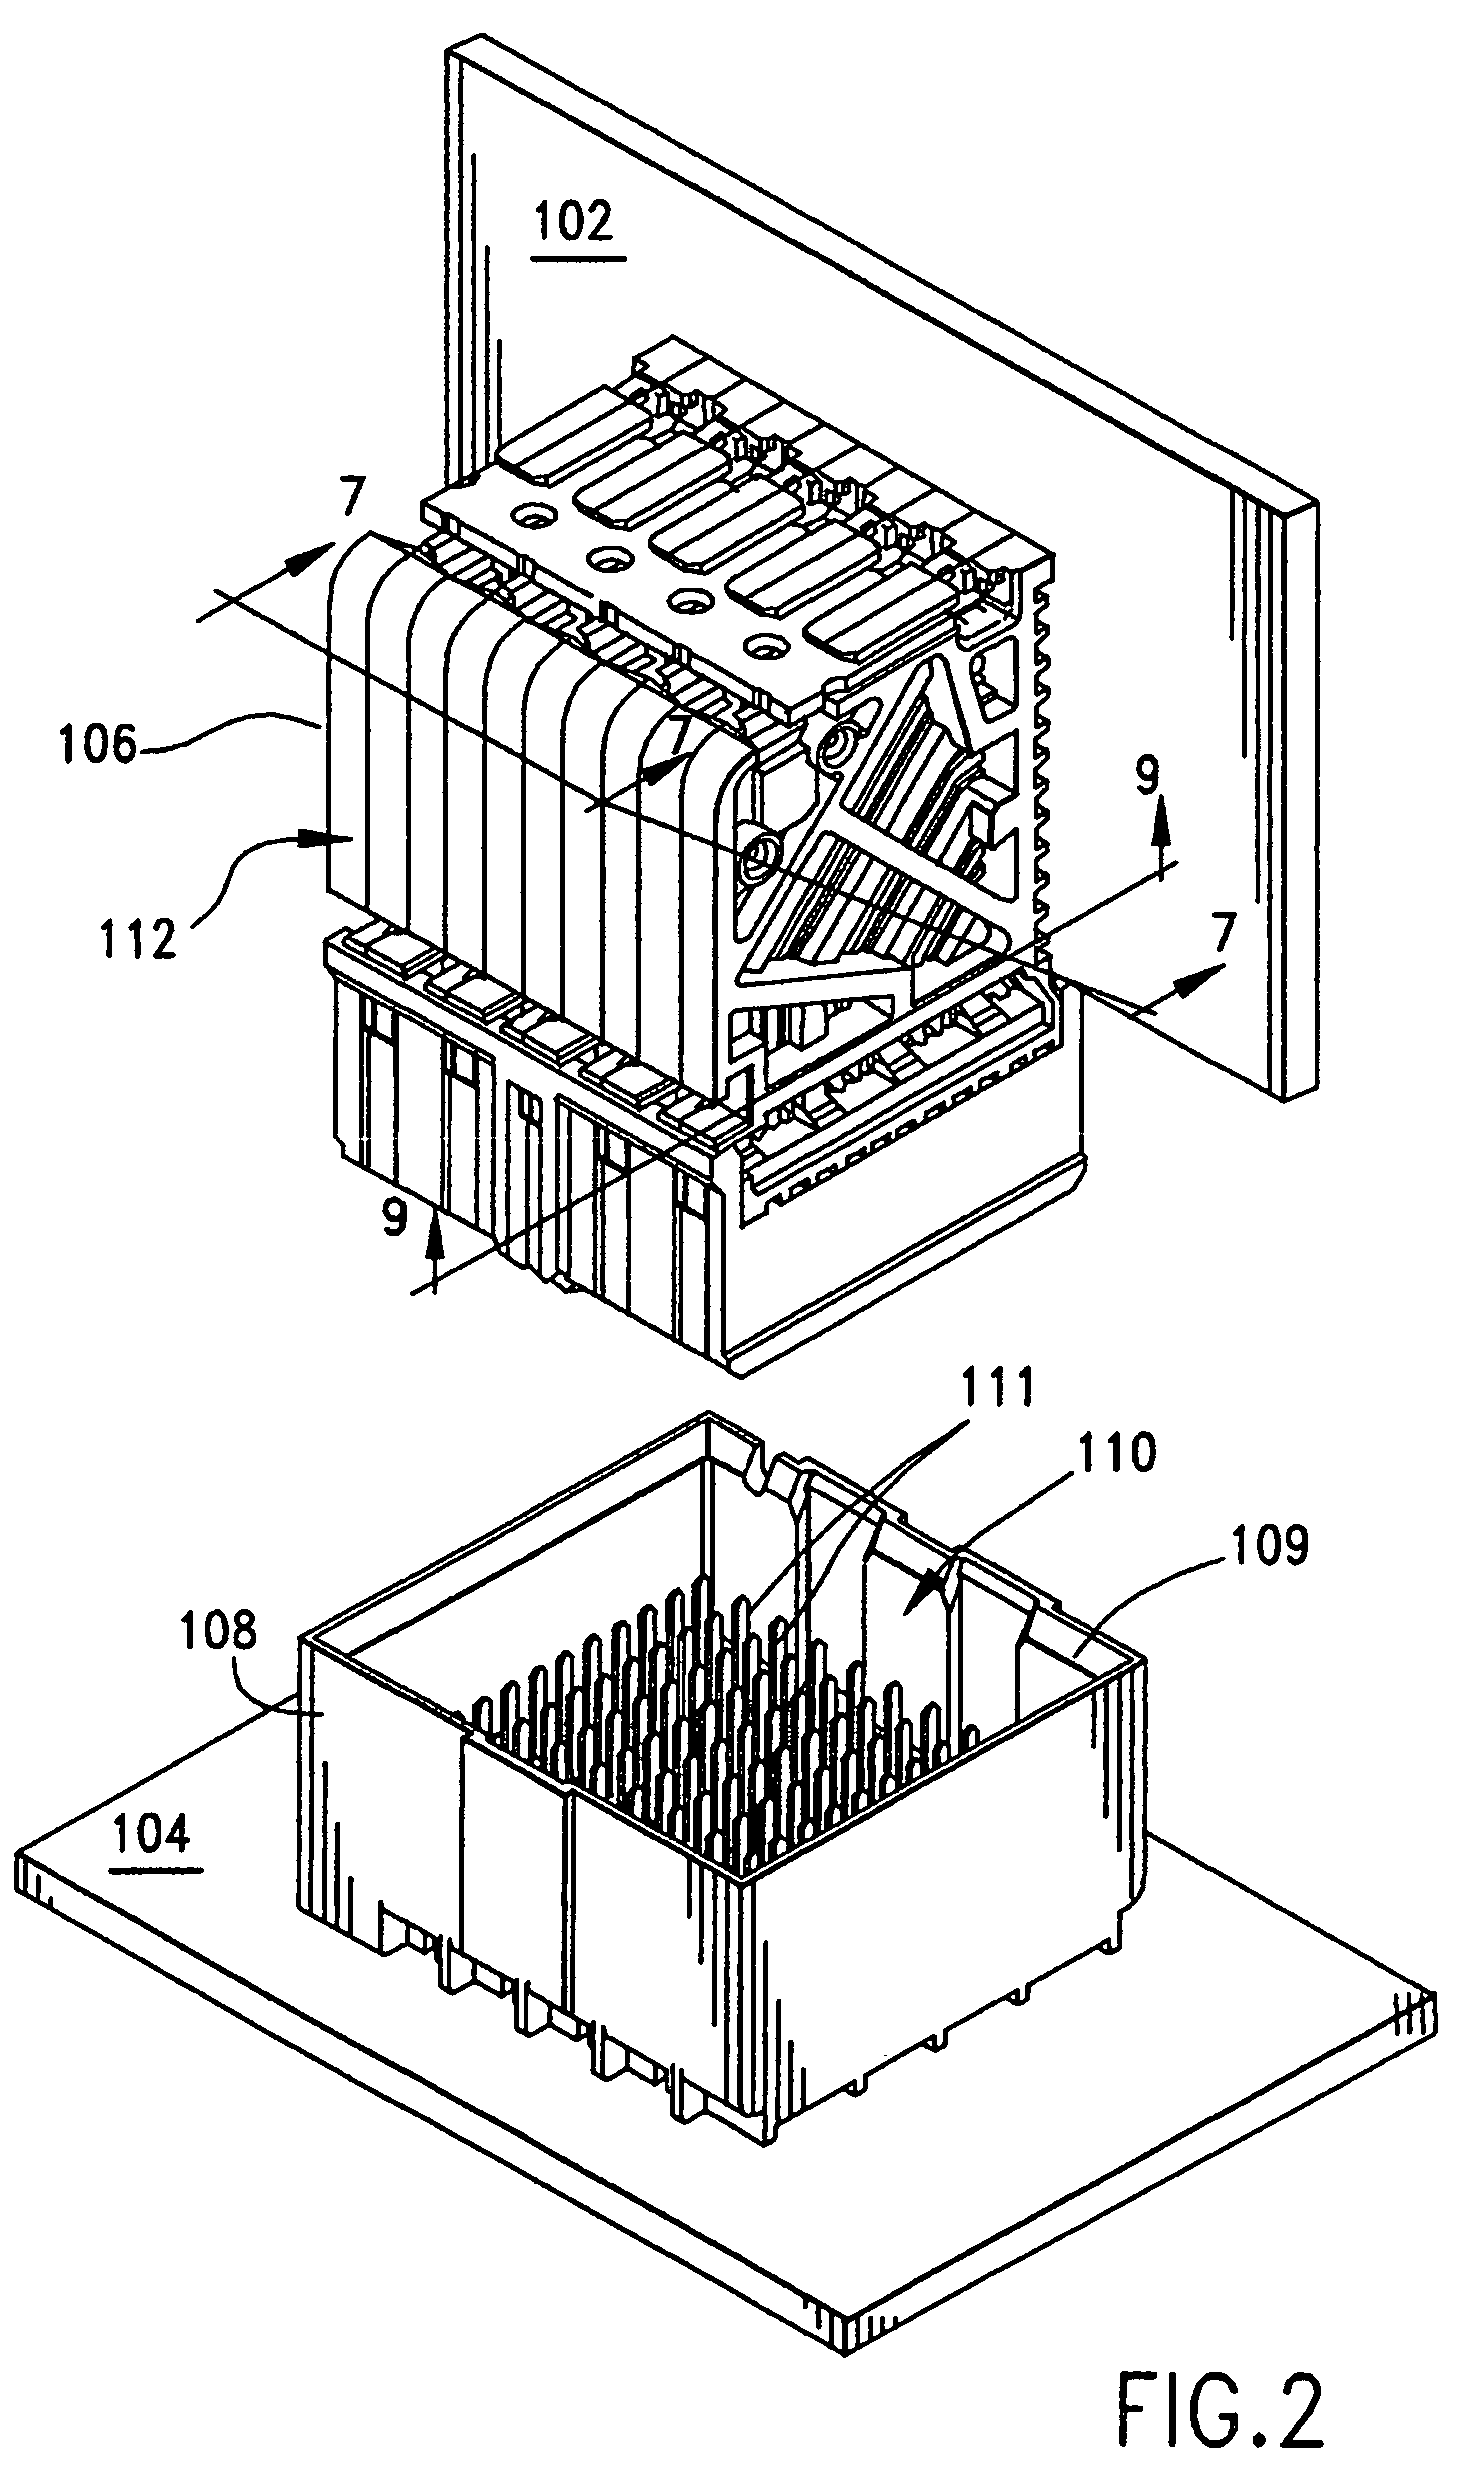 Impedance control in connector mounting areas